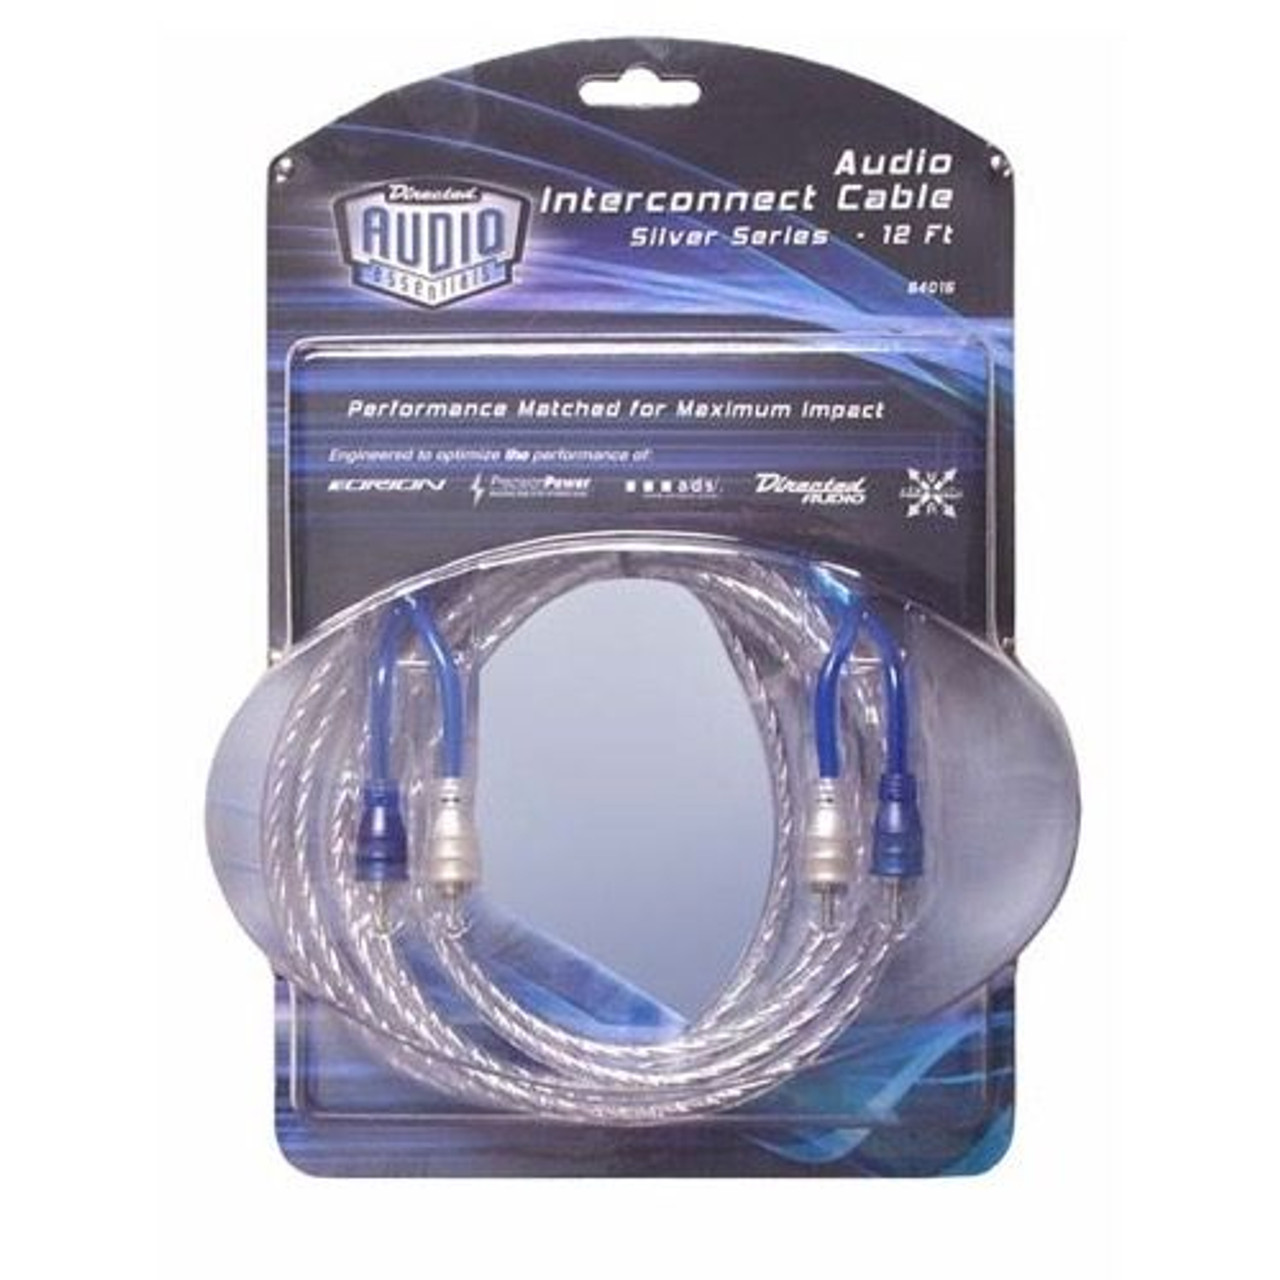 DIRECTV 12' FT Dual RCA Stereo Audio Cable Male Plugs Each End Silver Series Interconnect Audio Cable with Molded Plug Connectors Directed Audio 64015 Performance Matched OFC with Foil Shield, Part # 64015